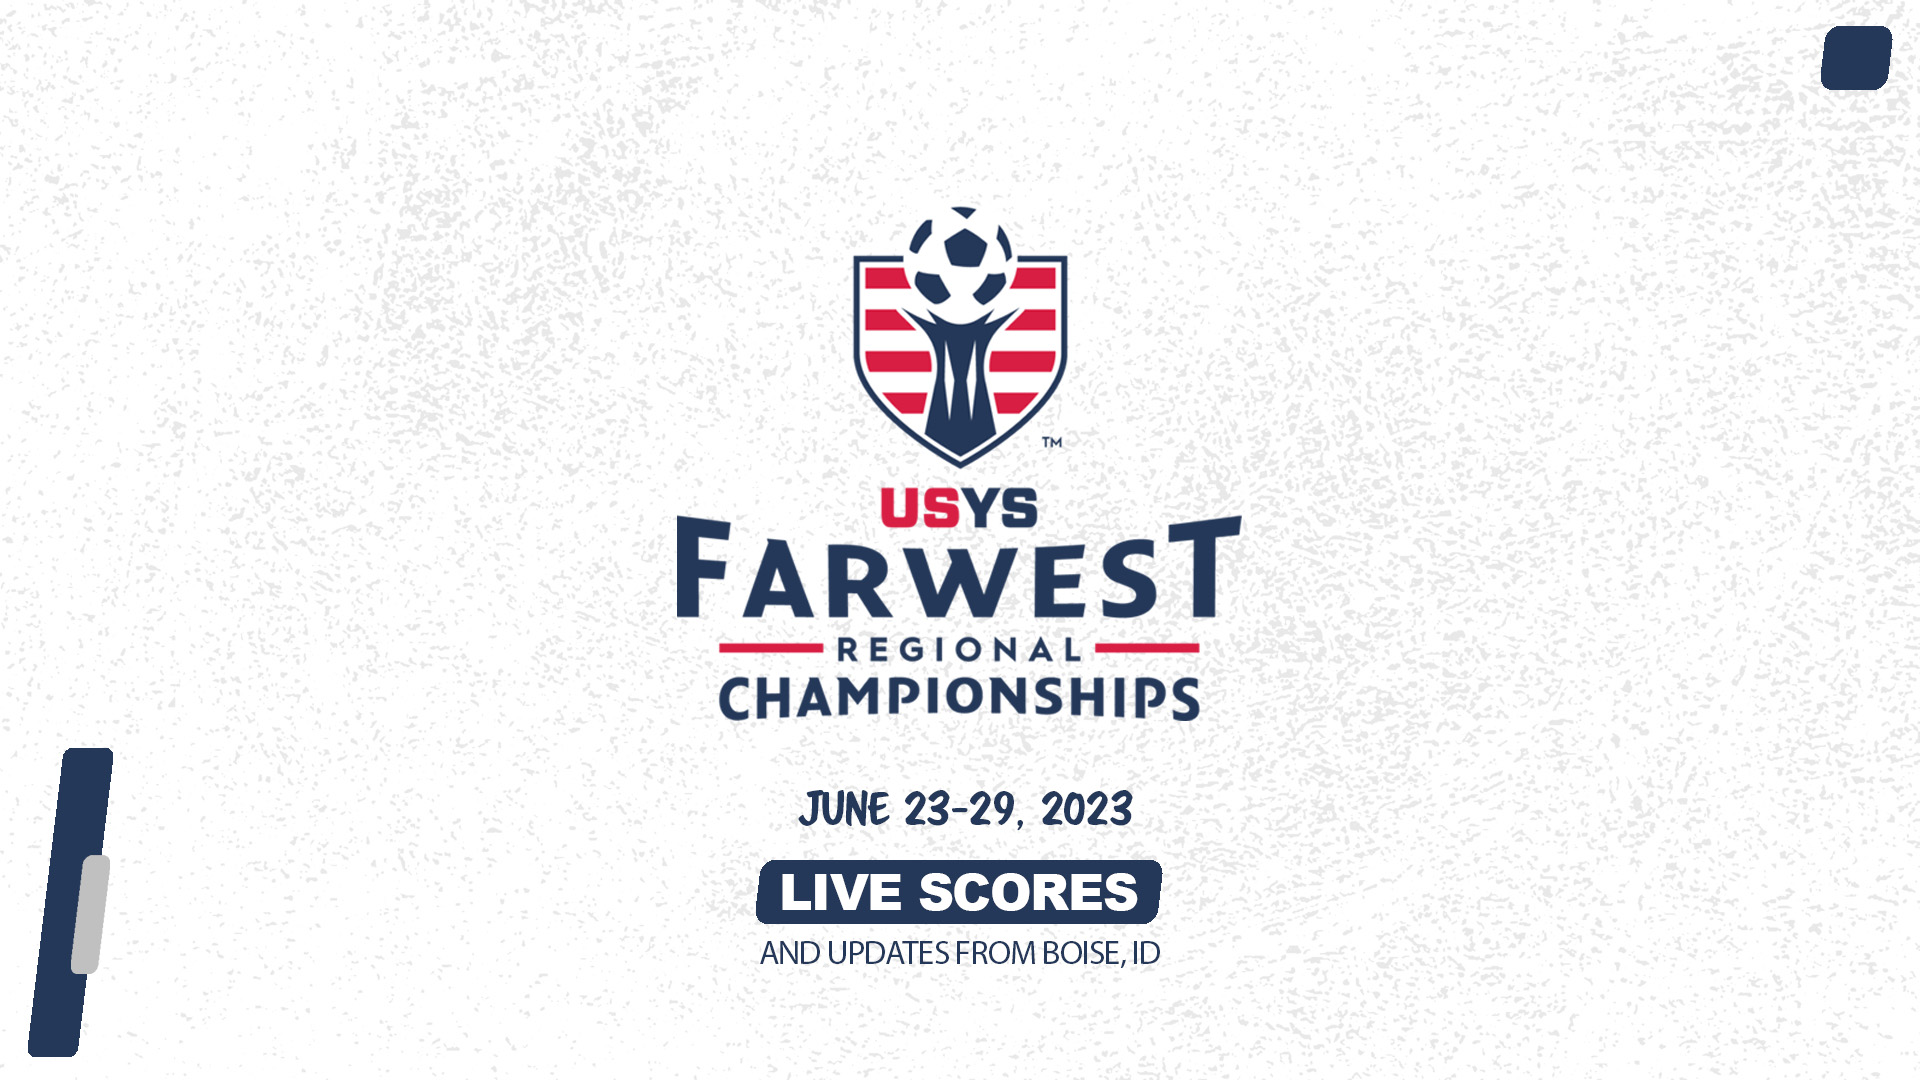 Live Scores and Updates from the 2023 USYS Far West Regional Championships